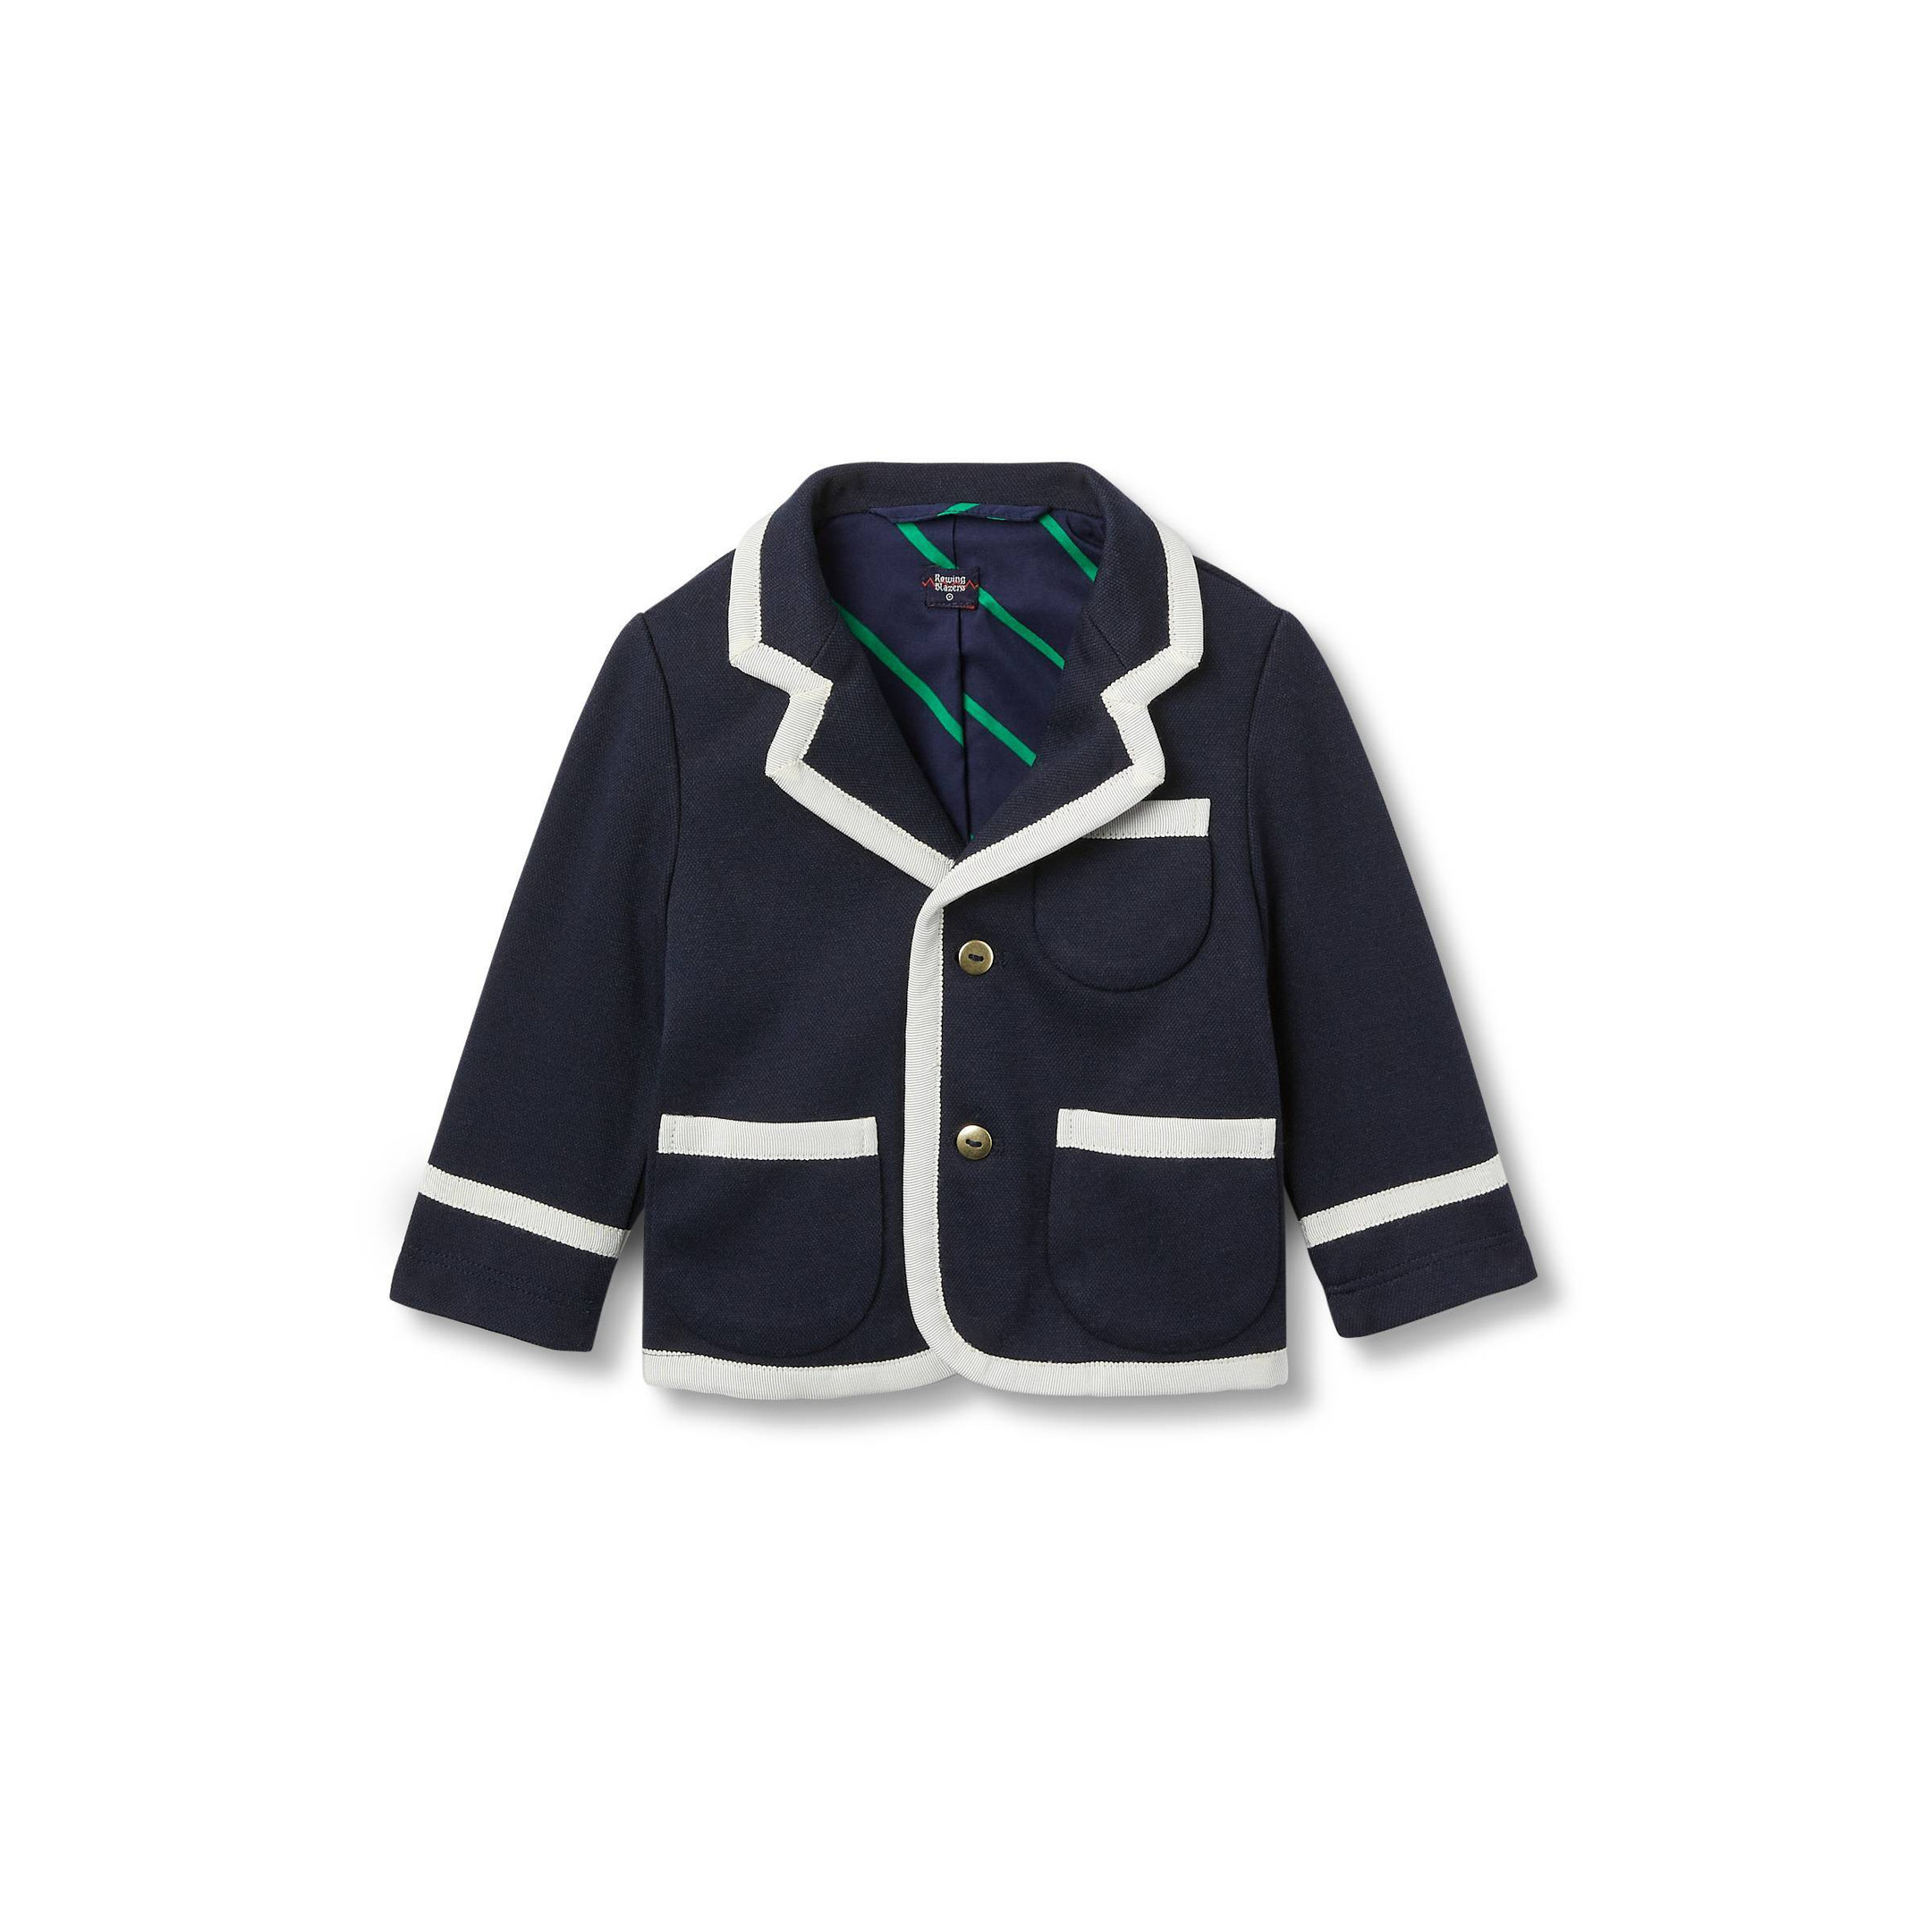 Toddler Adaptive Button Blazer with Abdominal Access - Rowing Blazers x Target